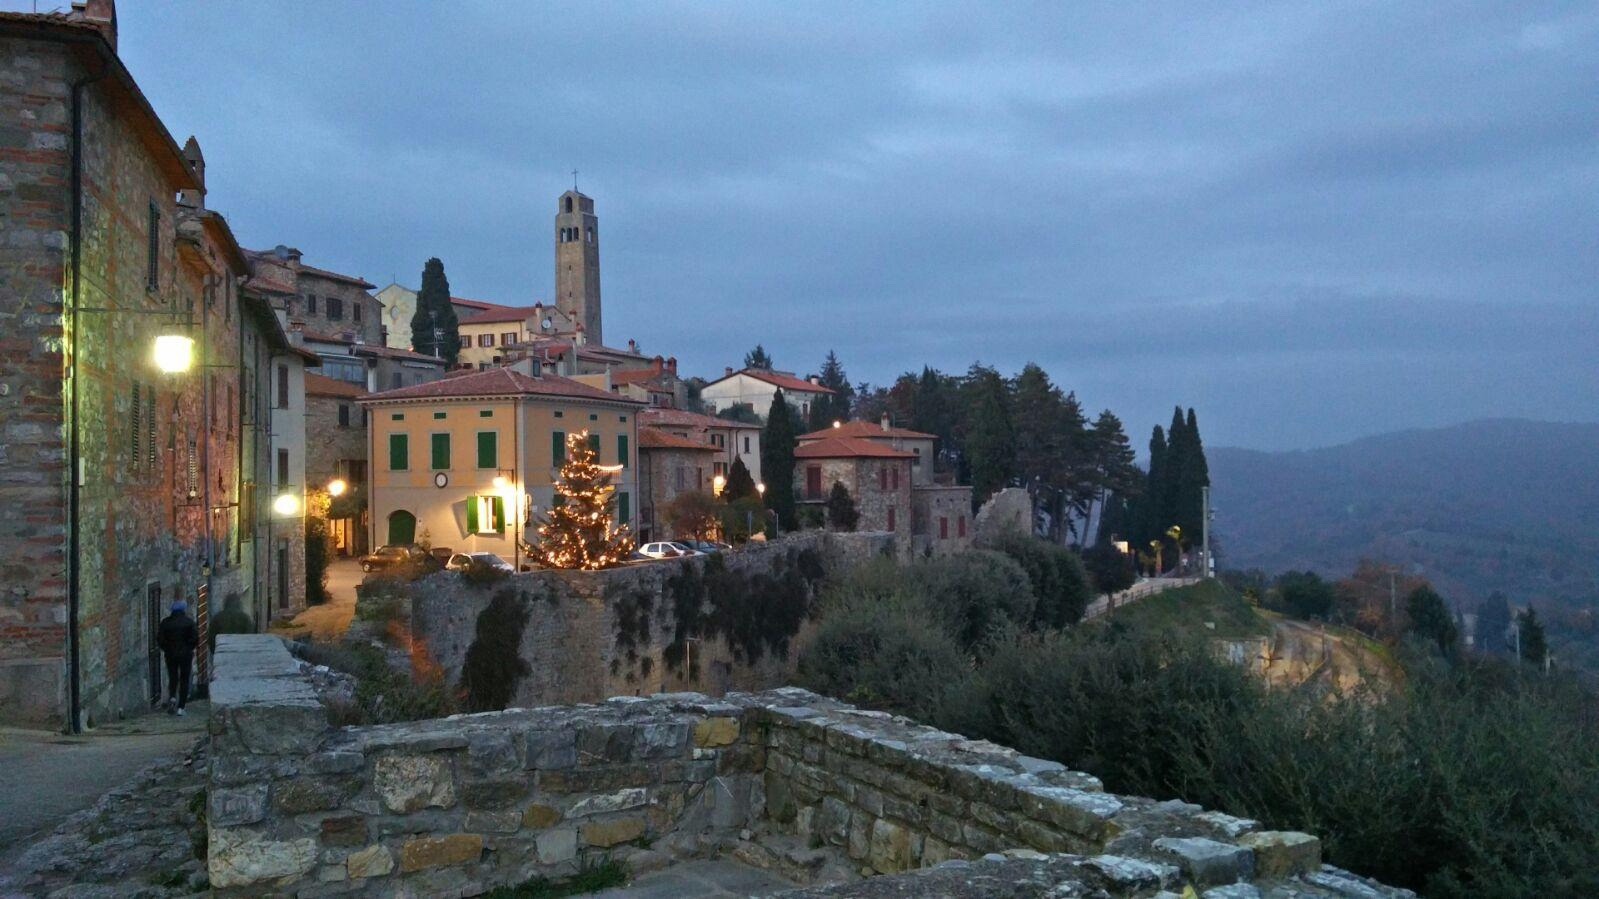 It was only a few months ago that Monica Tiezzi and her son, Lorenzo Pedulla, spent the Christmas holidays with her elderly parents and family in their ancestral hilltop town outside of Arezzo. Today, Covid-19 has brought a shock that no one in Italy could have imagined. 